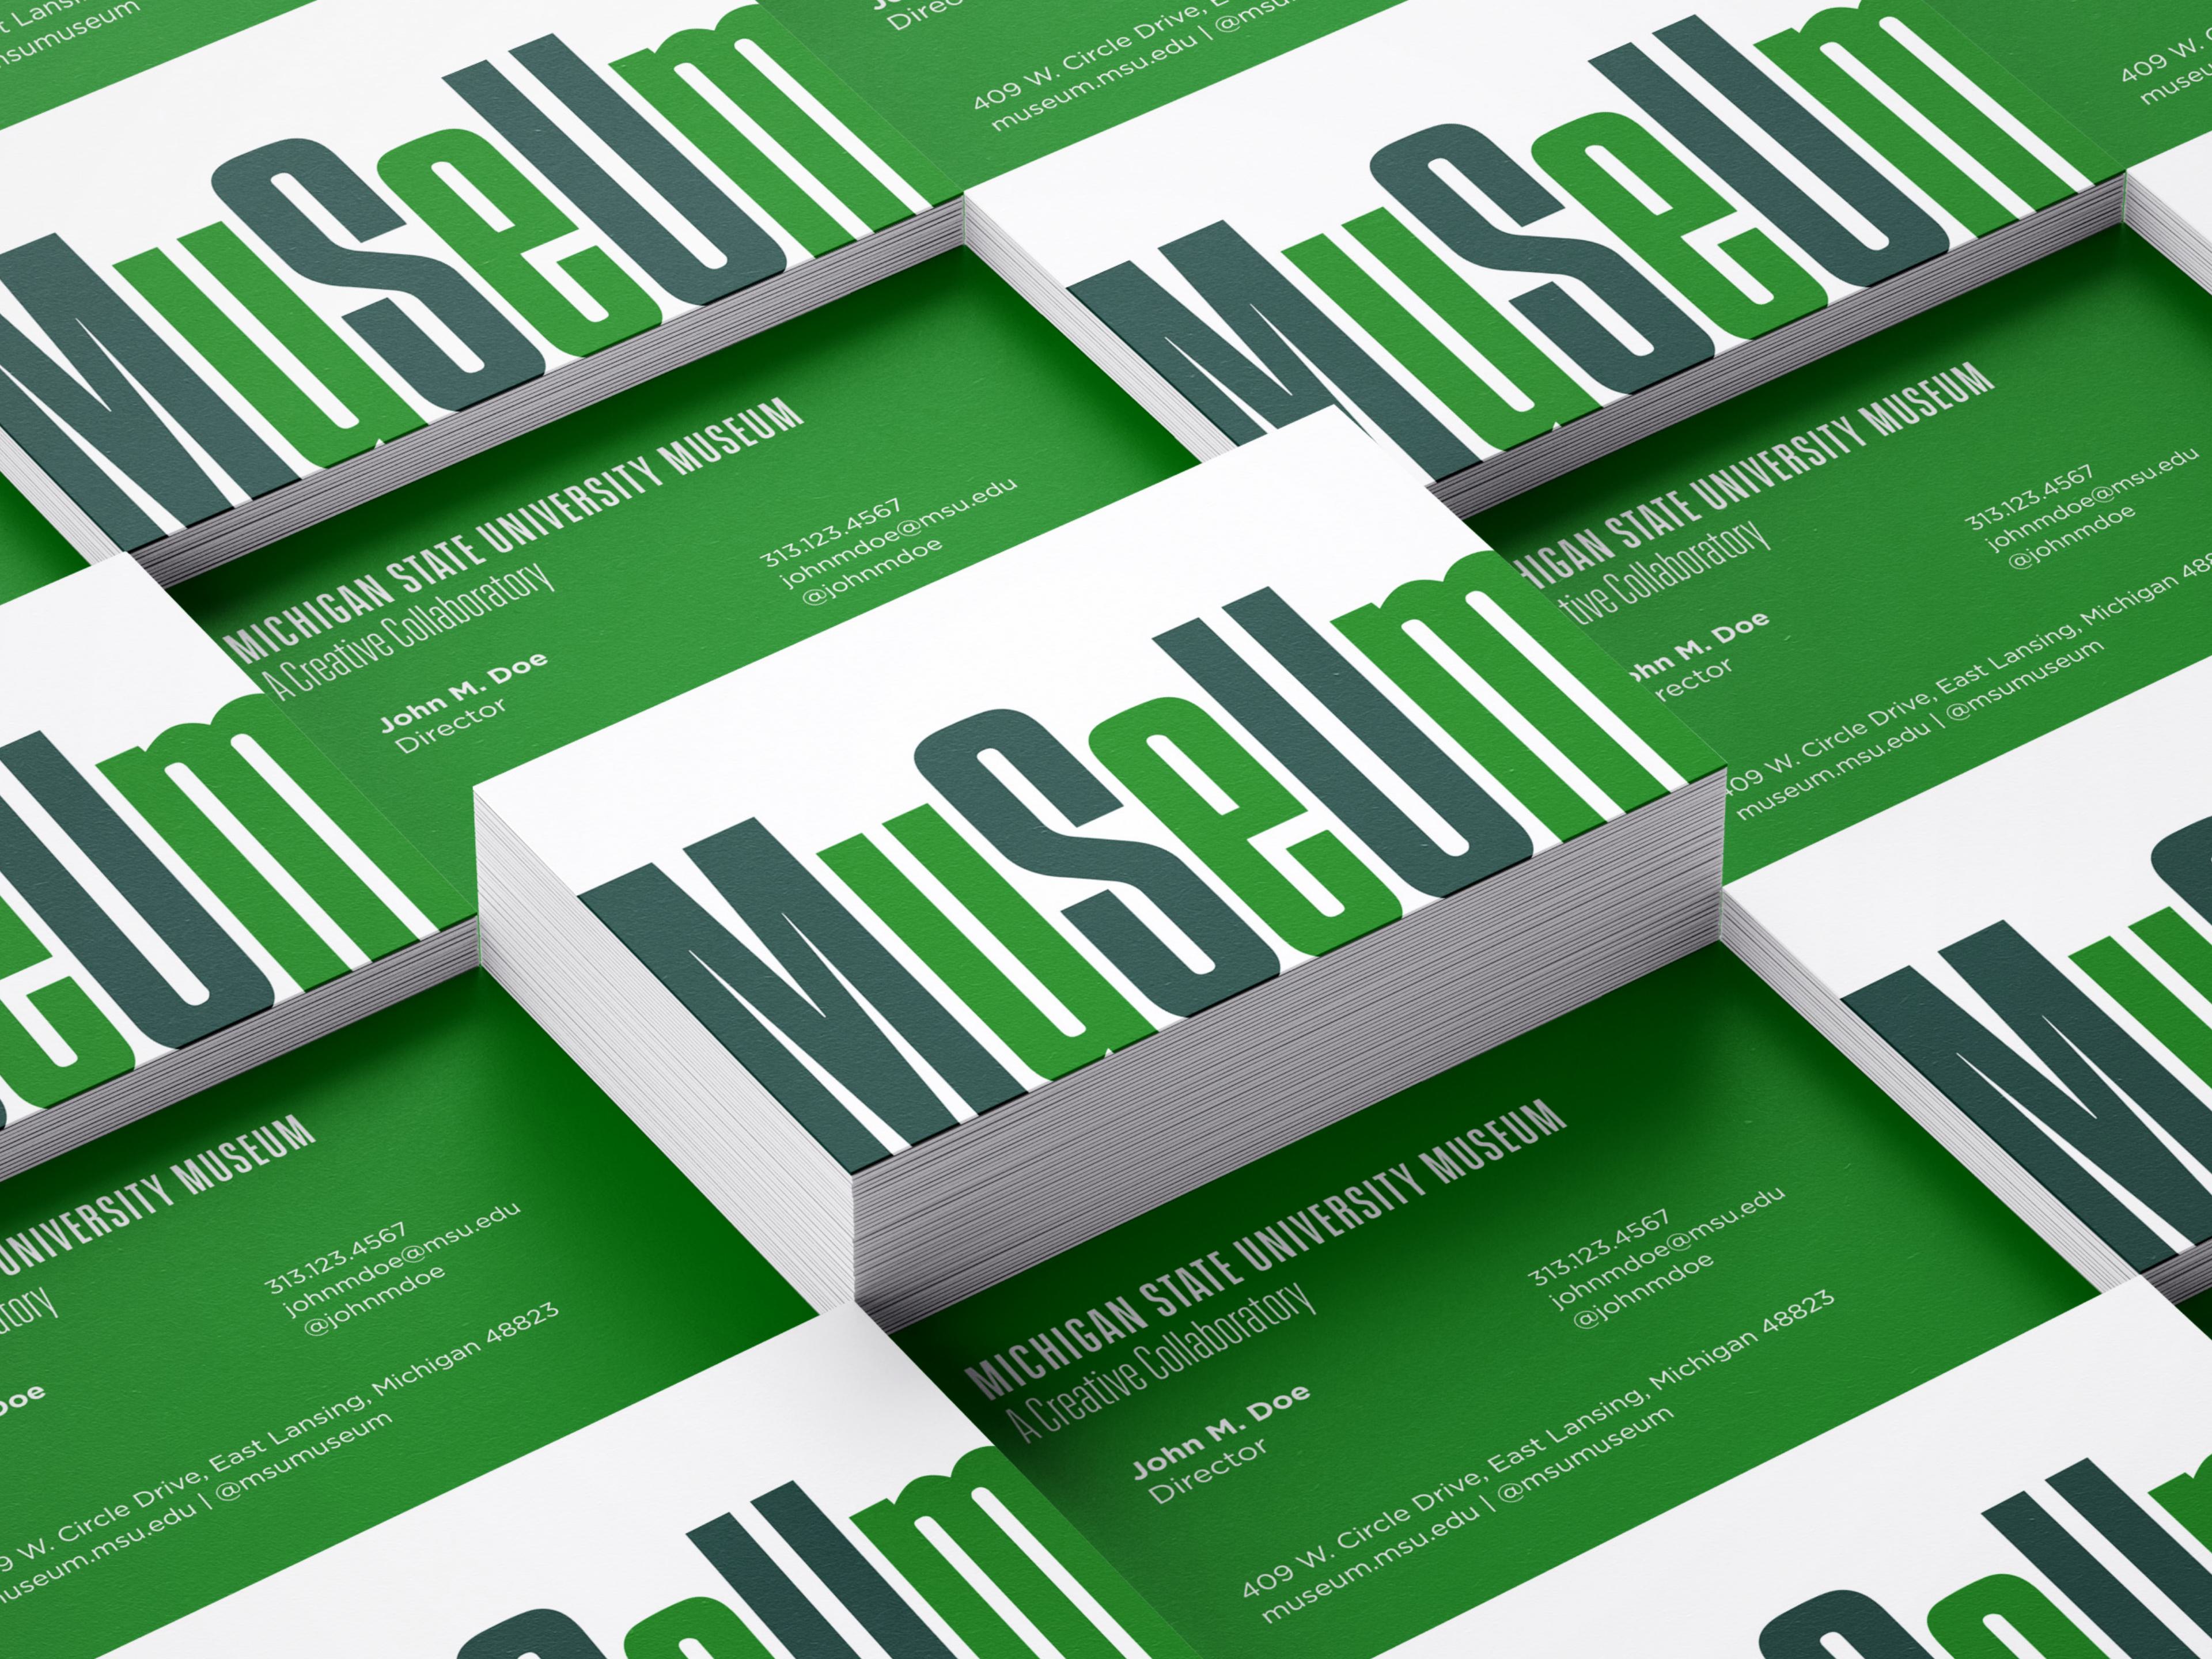 a mockup of newly branded business cards